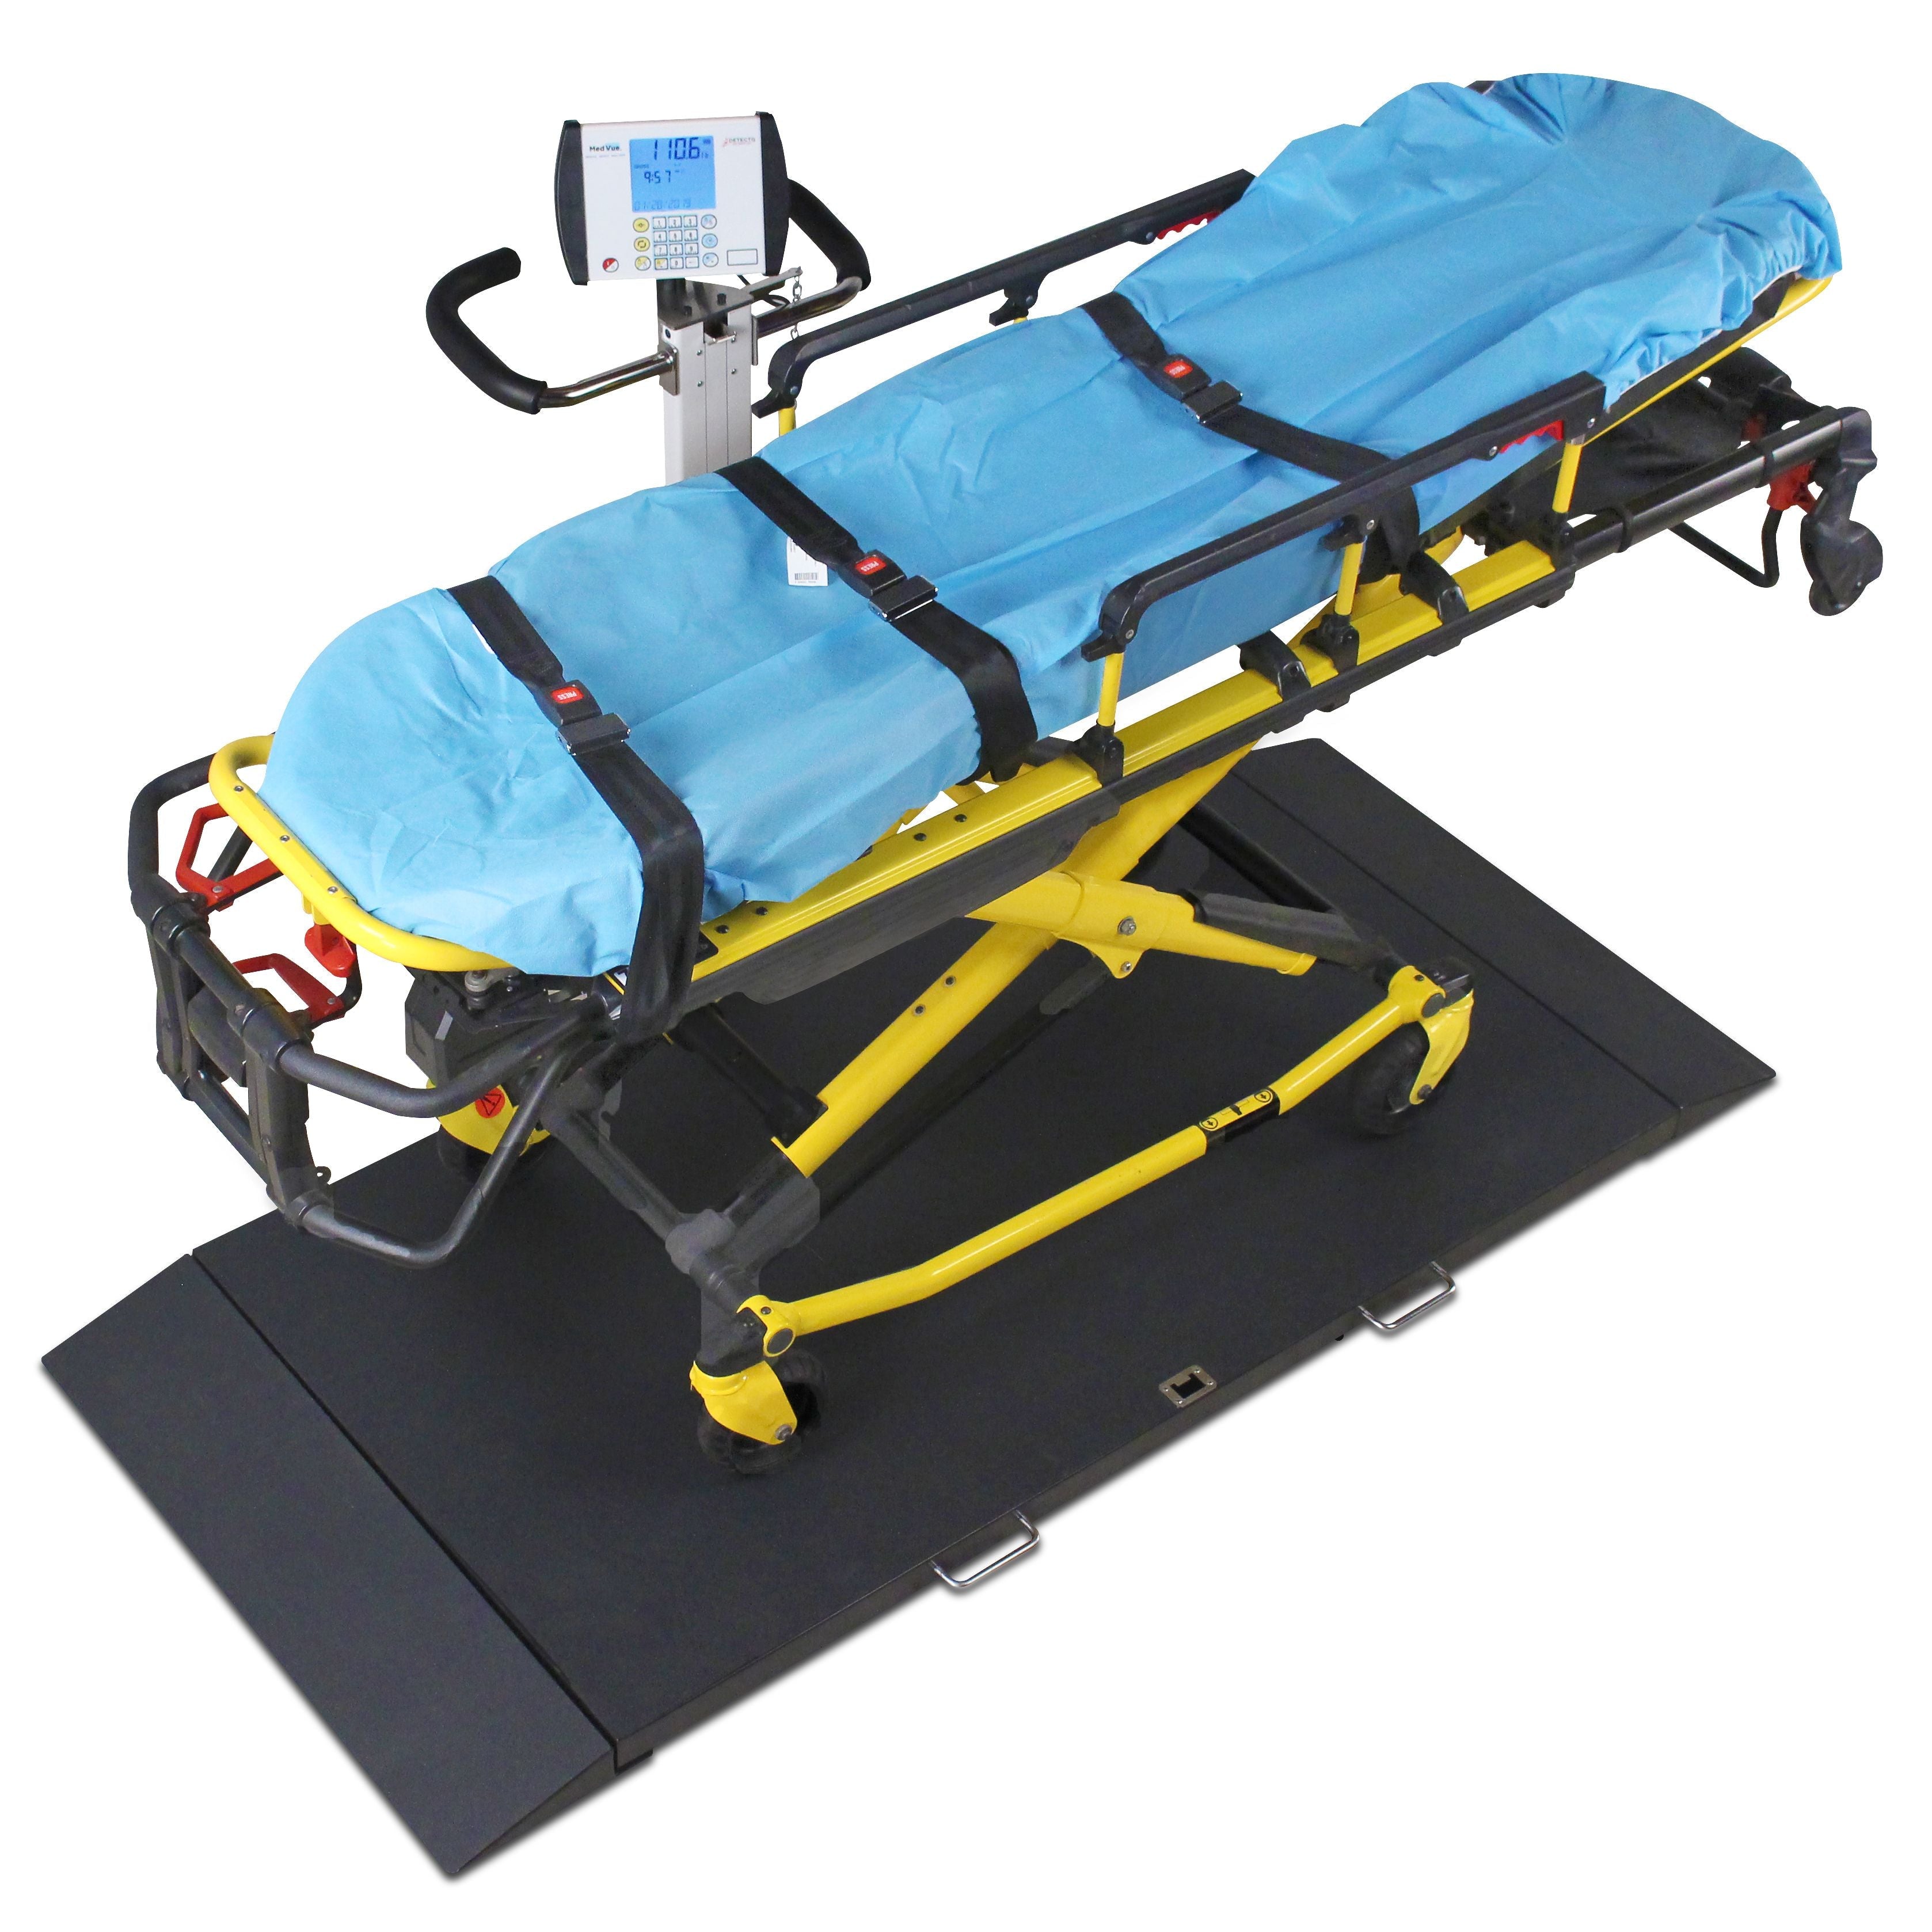 Detecto 8550 Portable Stretcher Scale with Fold-Up Column - With Stretcher